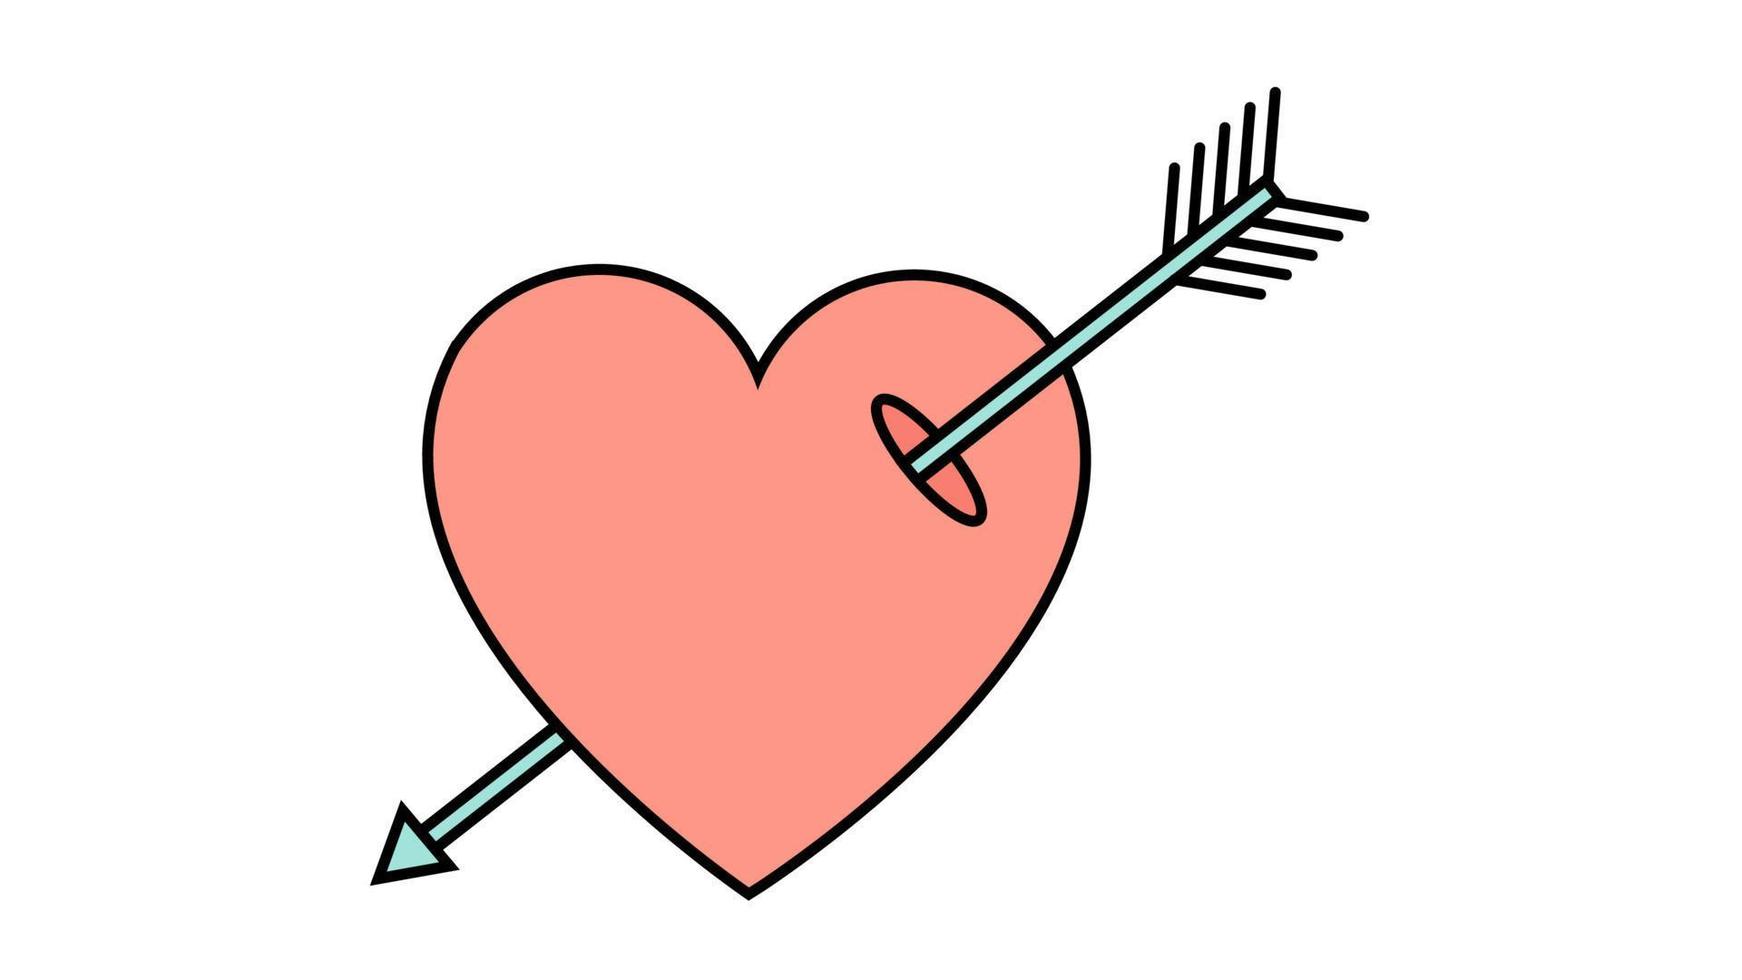 Simple flat style icon of a beautiful heart pierced by an arrow of a cupid for the feast of love on Valentine's Day or March 8th. Vector illustration